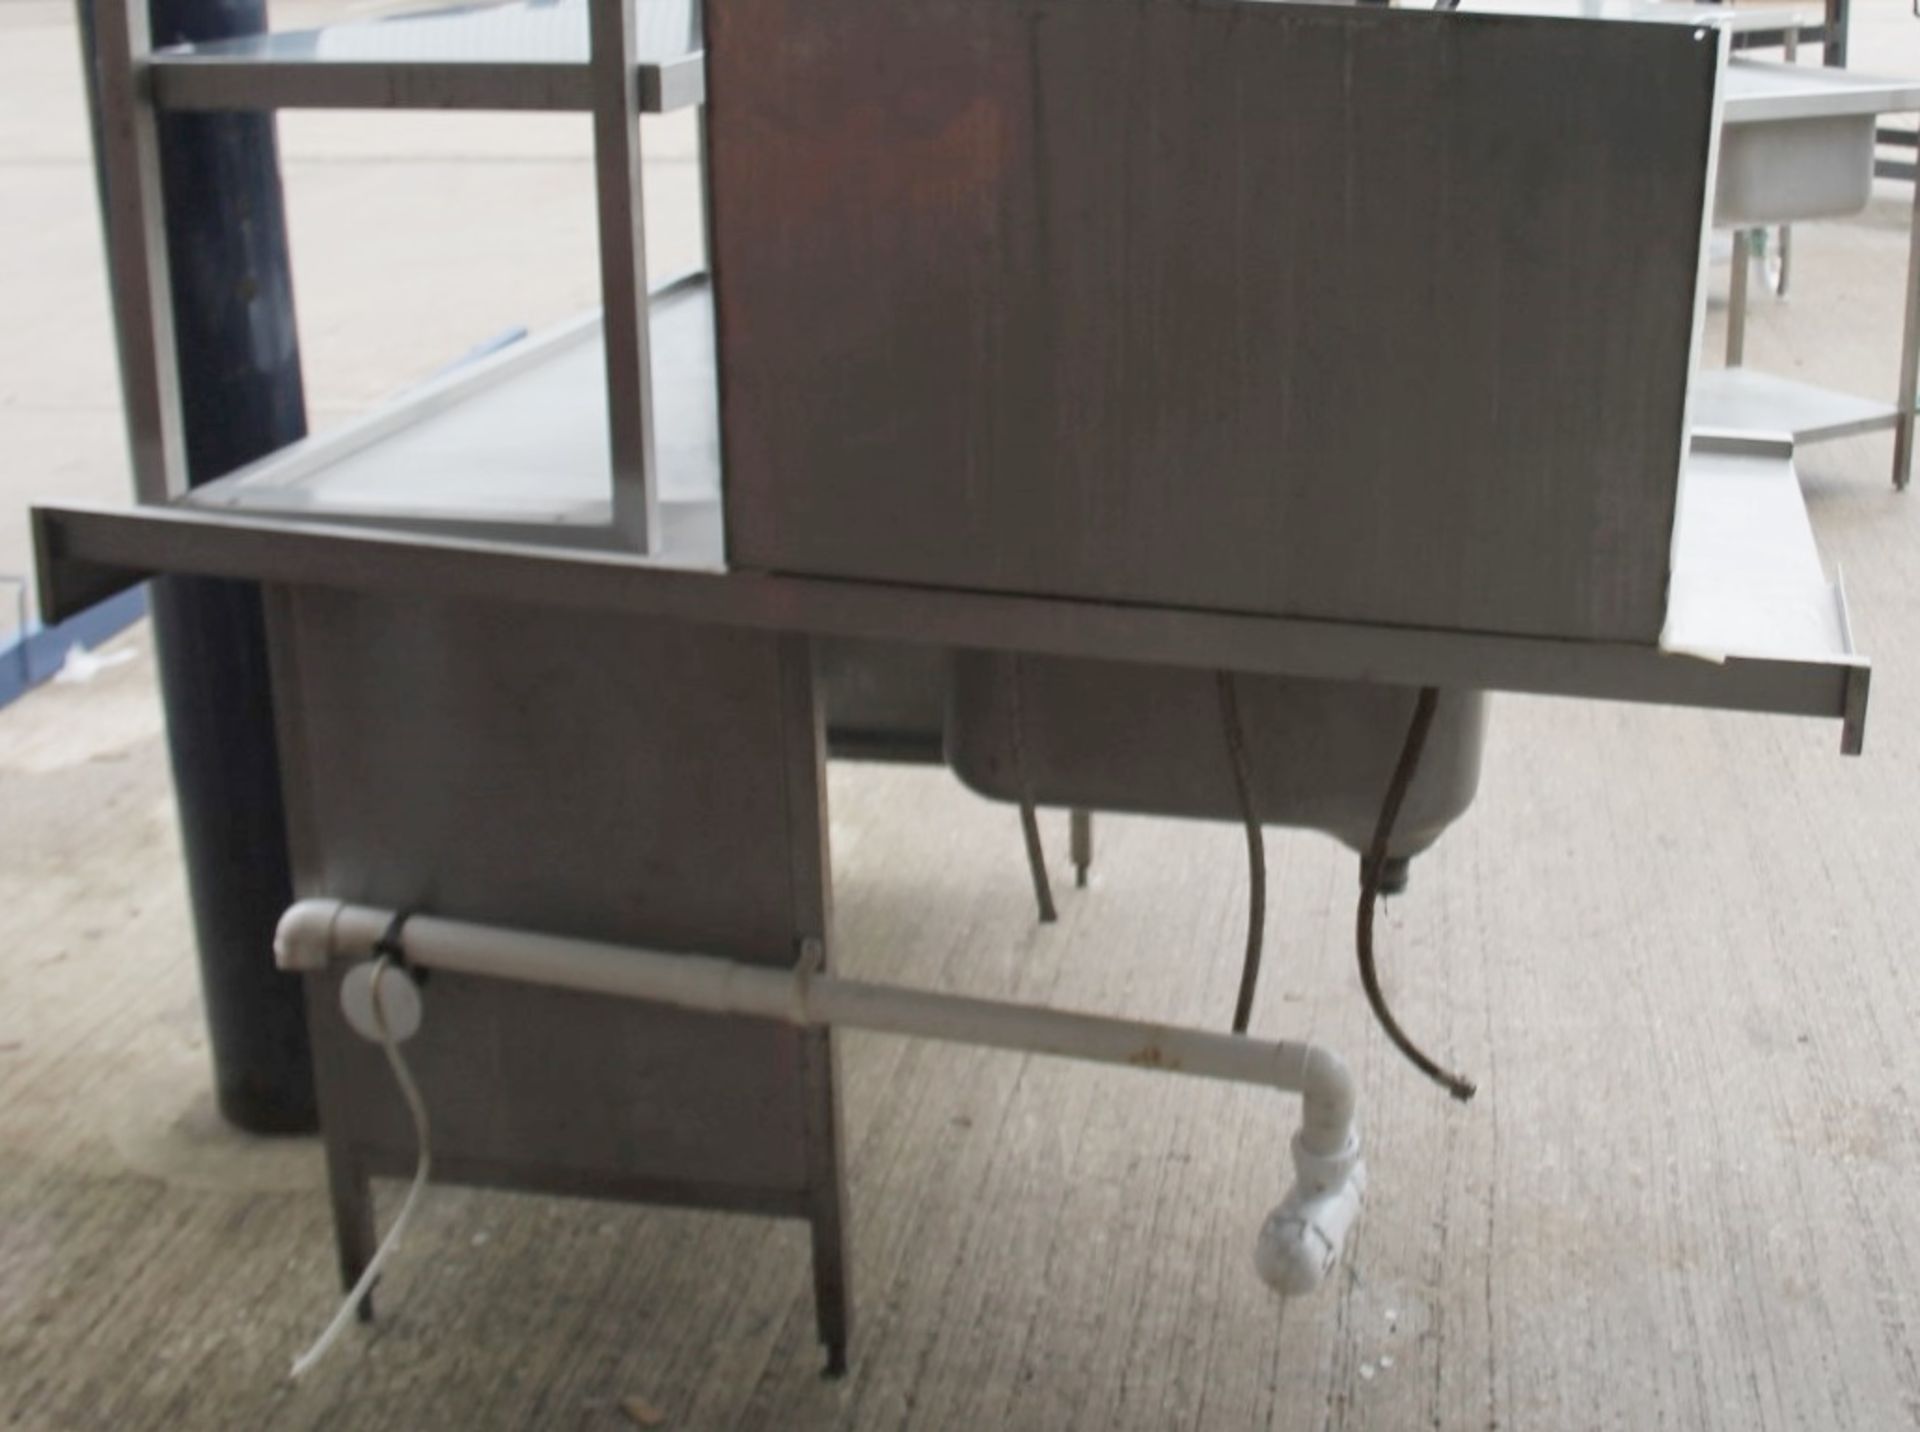 1 x HOBART Passthrough Dishwasher With Inlet Table and Outlet Table With Wash Basin and Spray Hose - Image 9 of 15